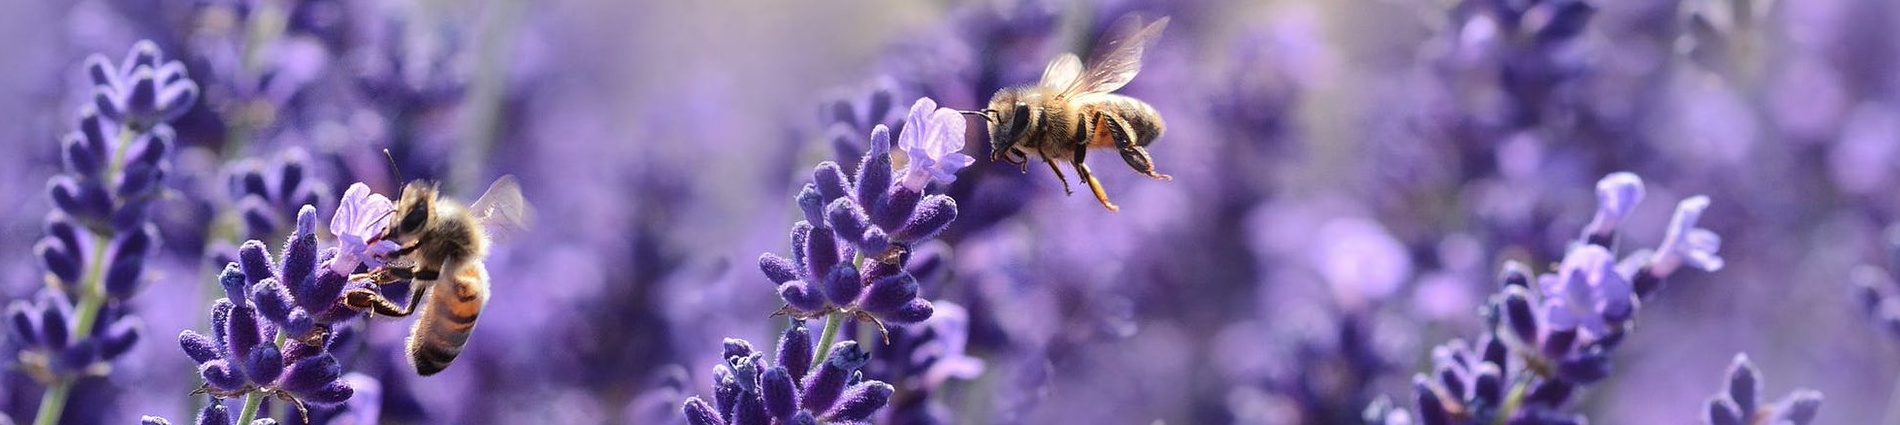 Photo of Bees on Flowers